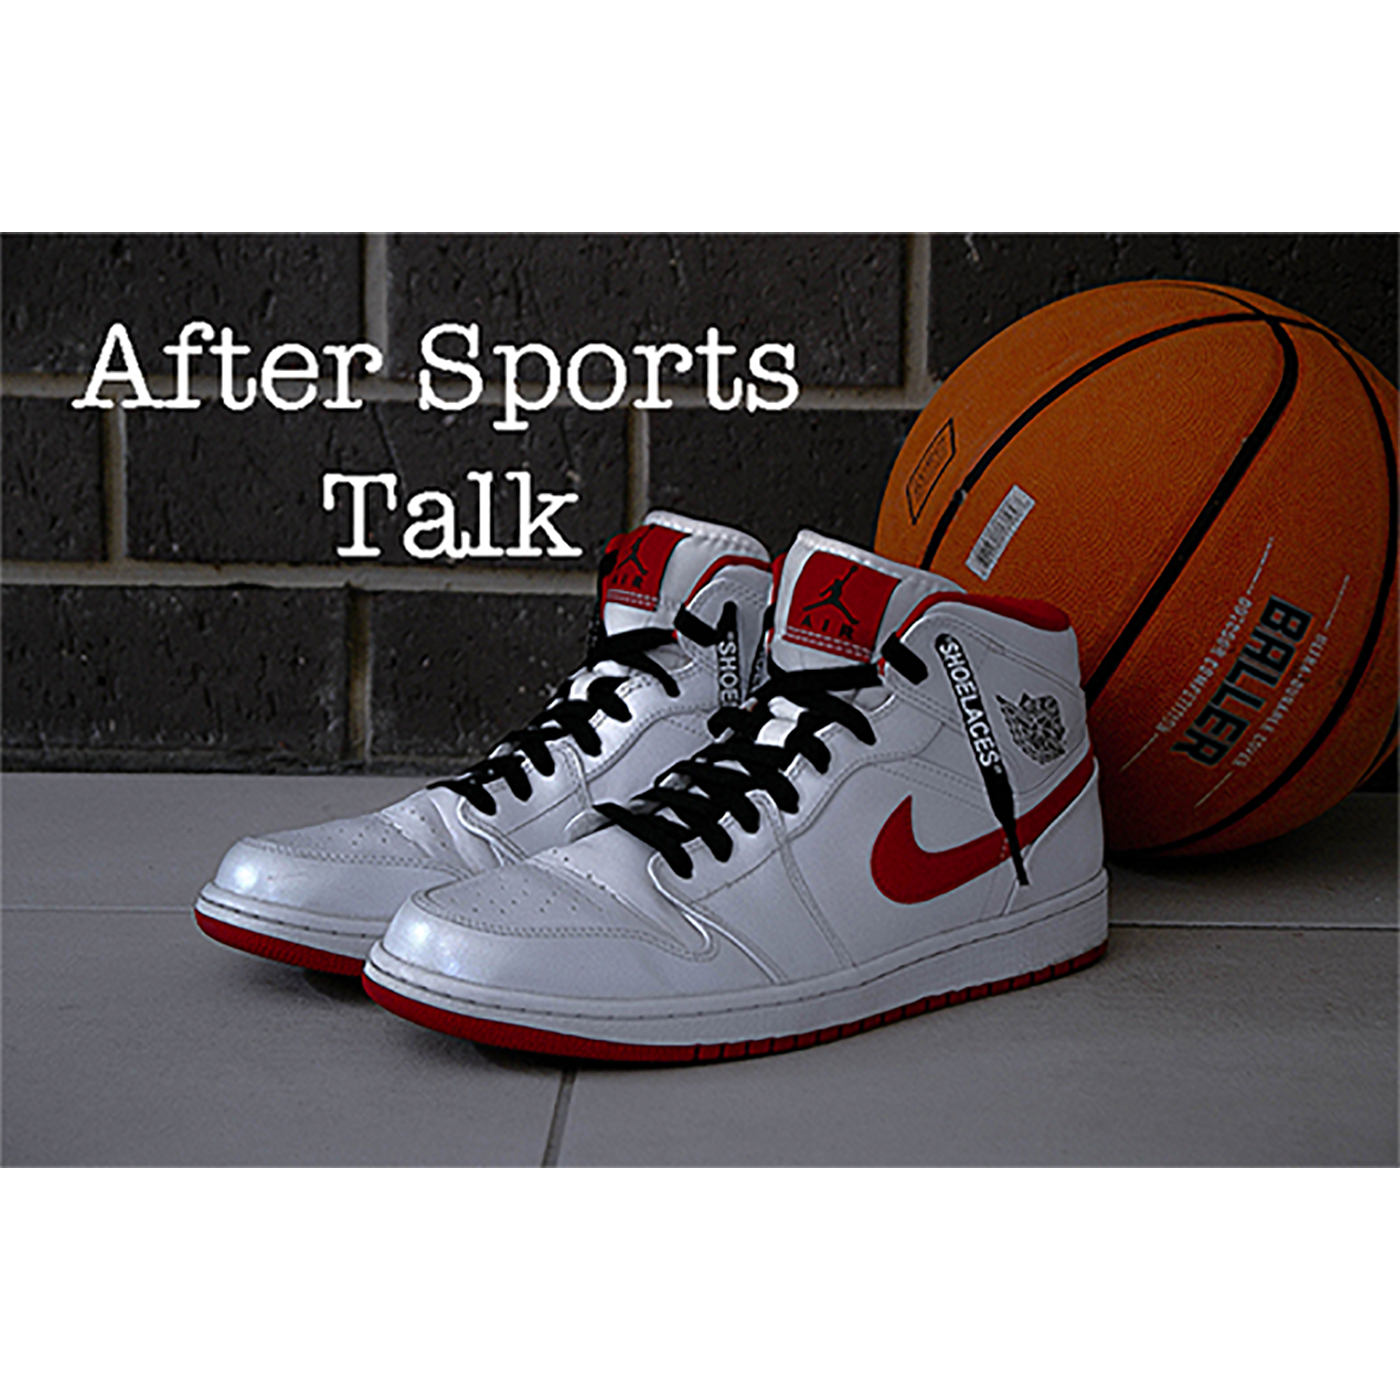 Show artwork for After Sports Talk